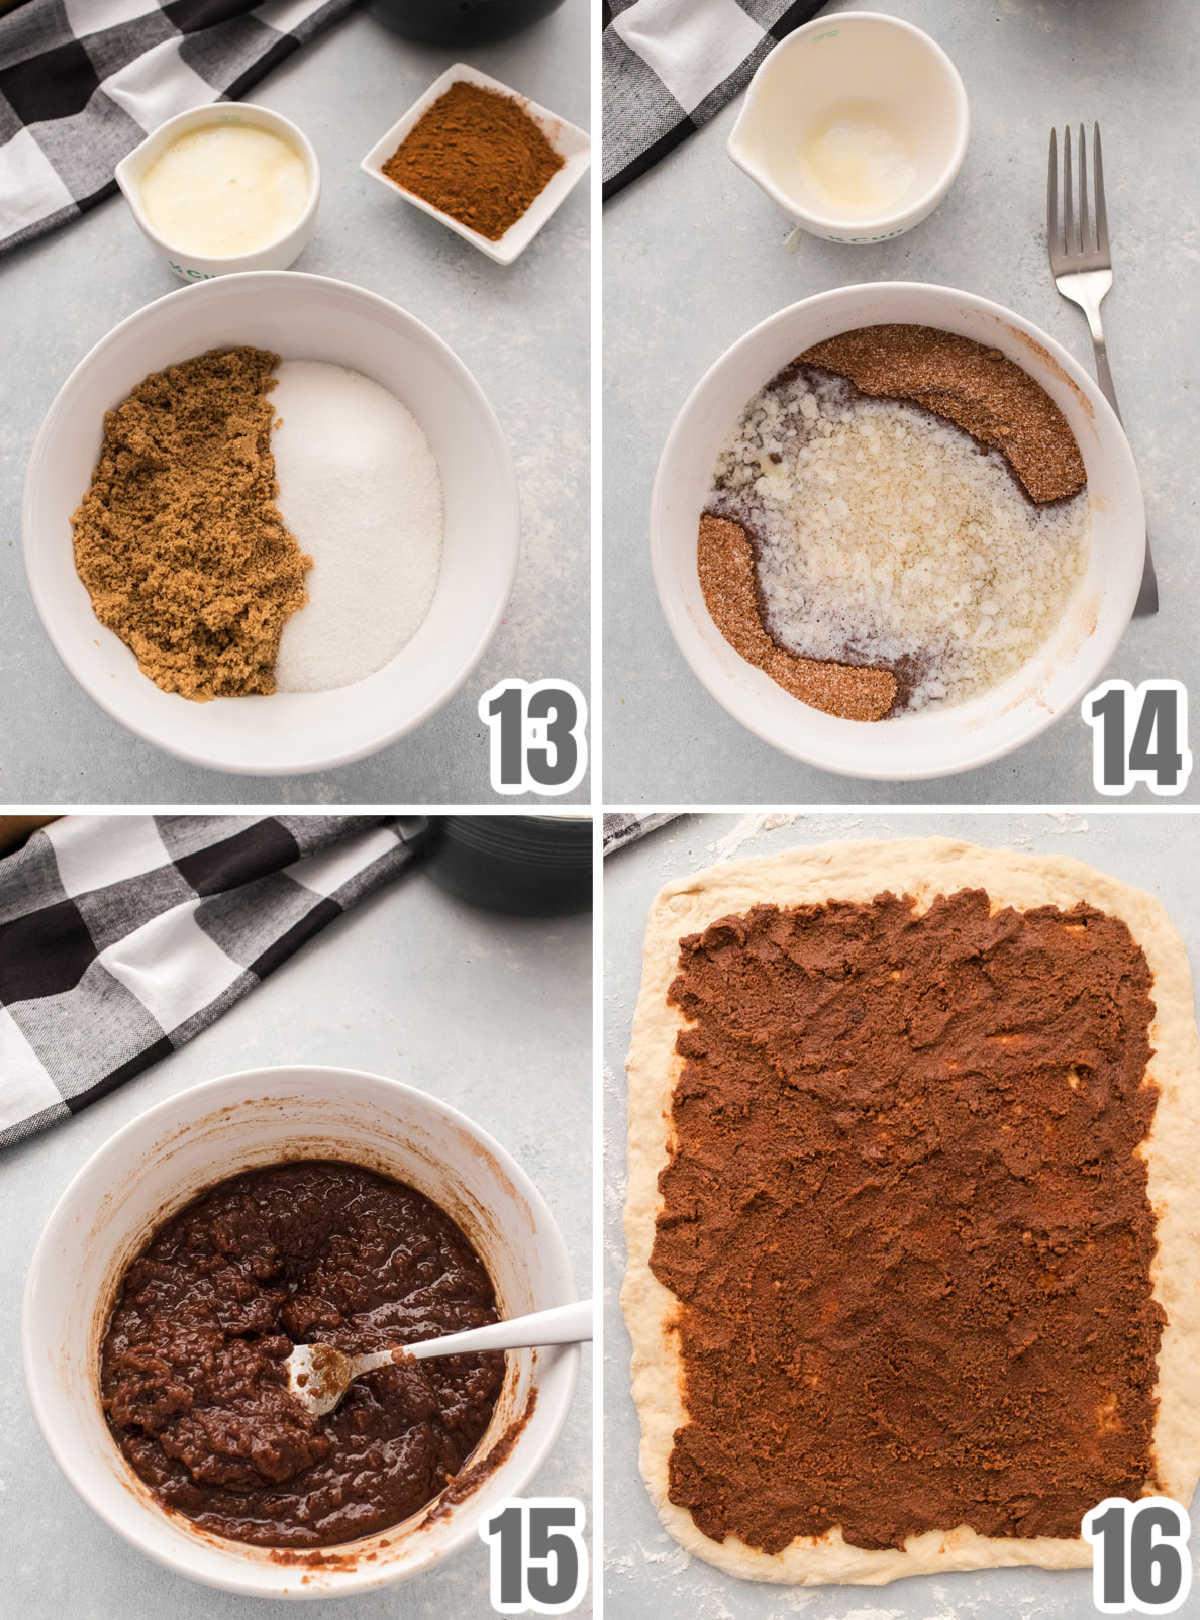 Collage image showing the steps for making the Cinnamon Filling for the rolls.